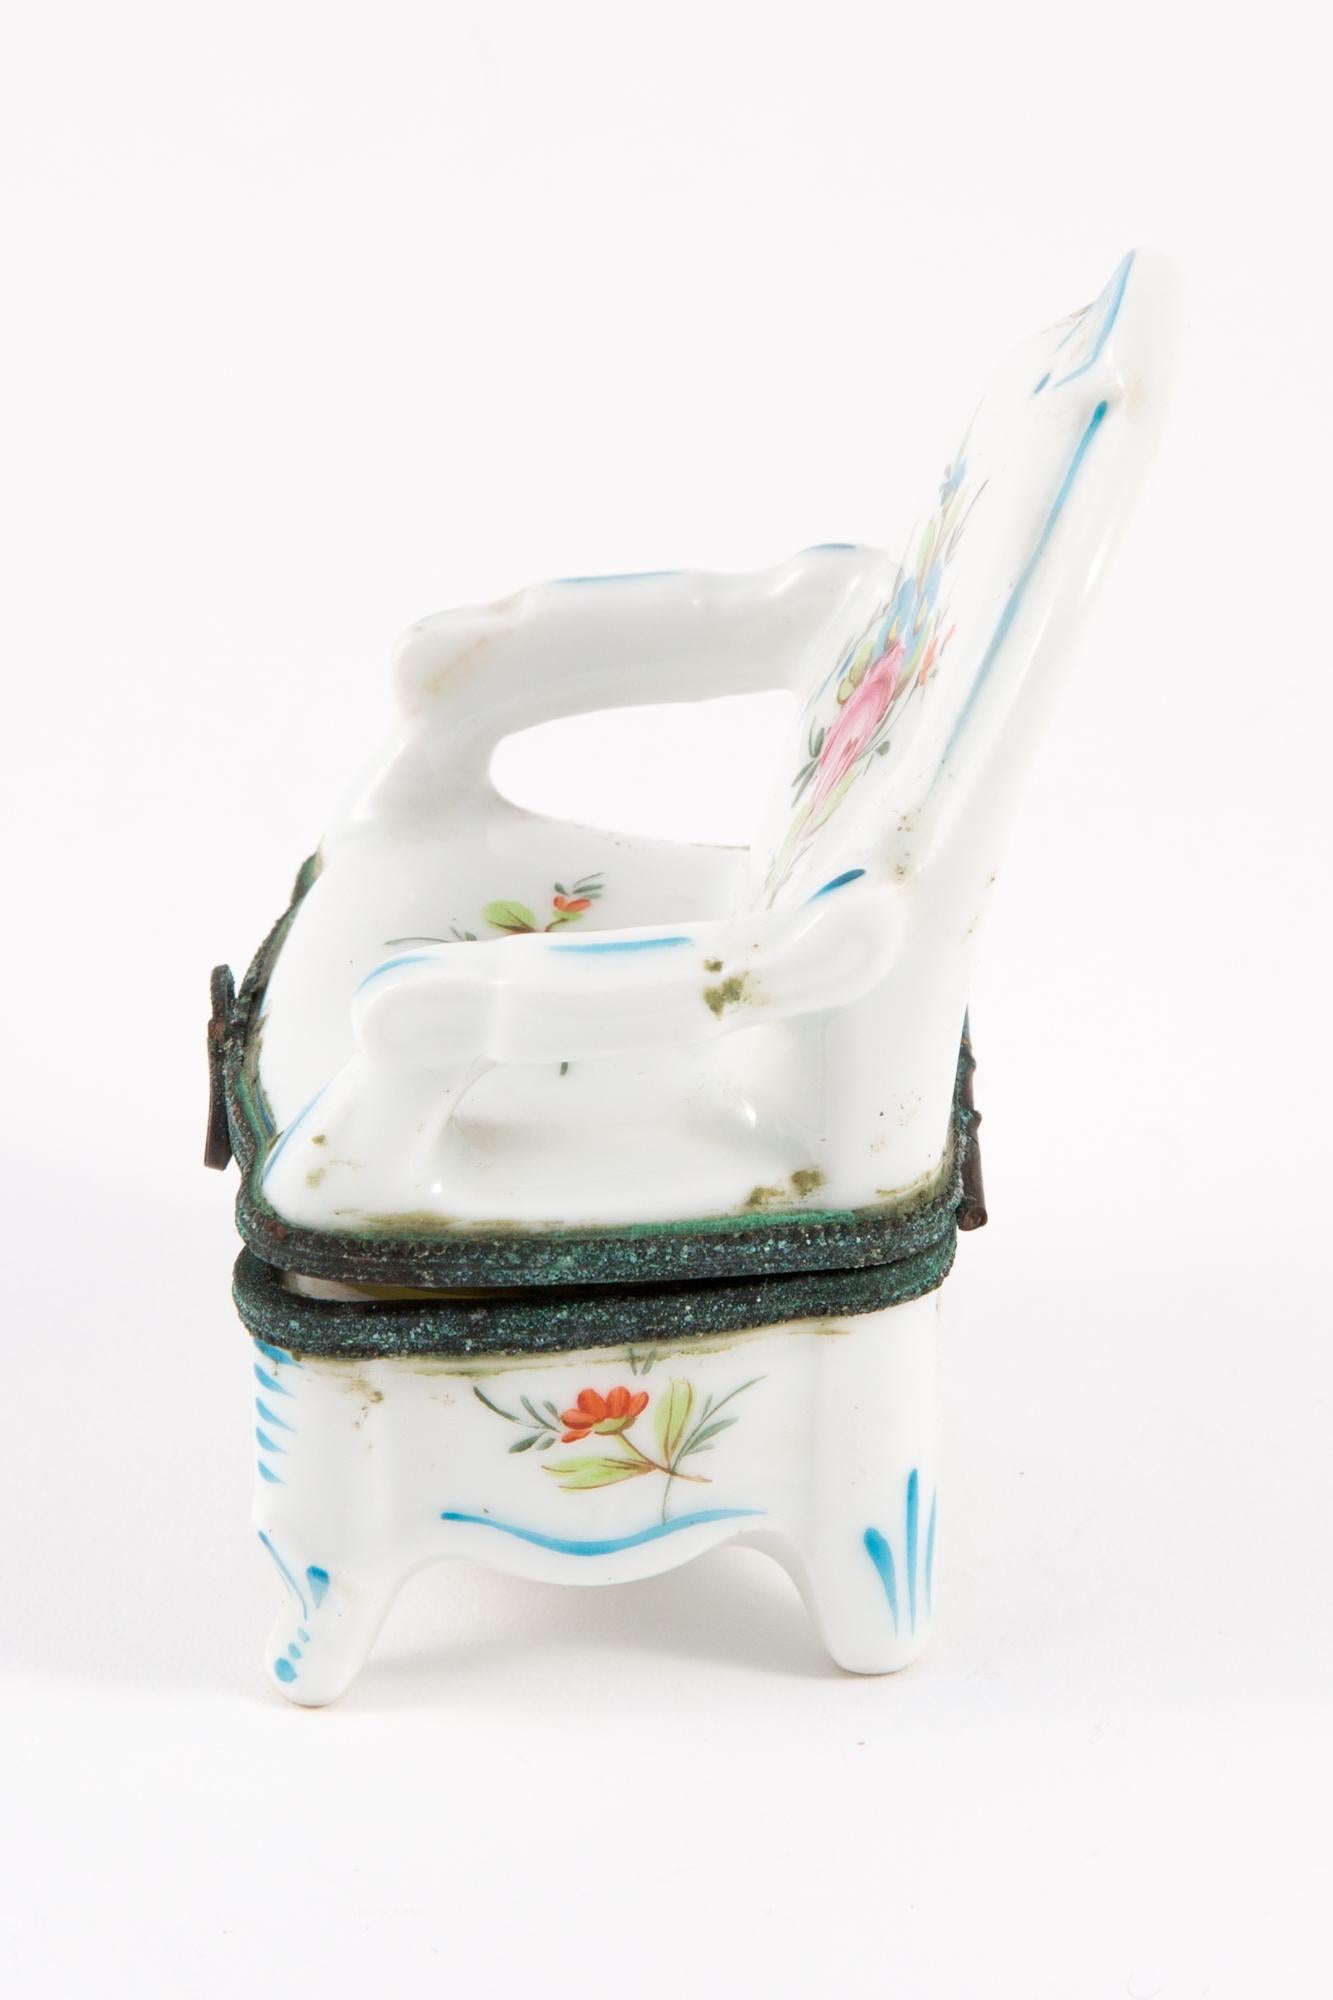 Porcelain armchair shaped jewelry box featuring a faience decorated, a under stamp.
In good vintage condition. Made in France. 
Length 2.7in (7cm)
Width 2in. (5.5cm)
Height: 3.9in (10cm)
We guarantee you will receive this gorgeous item as described